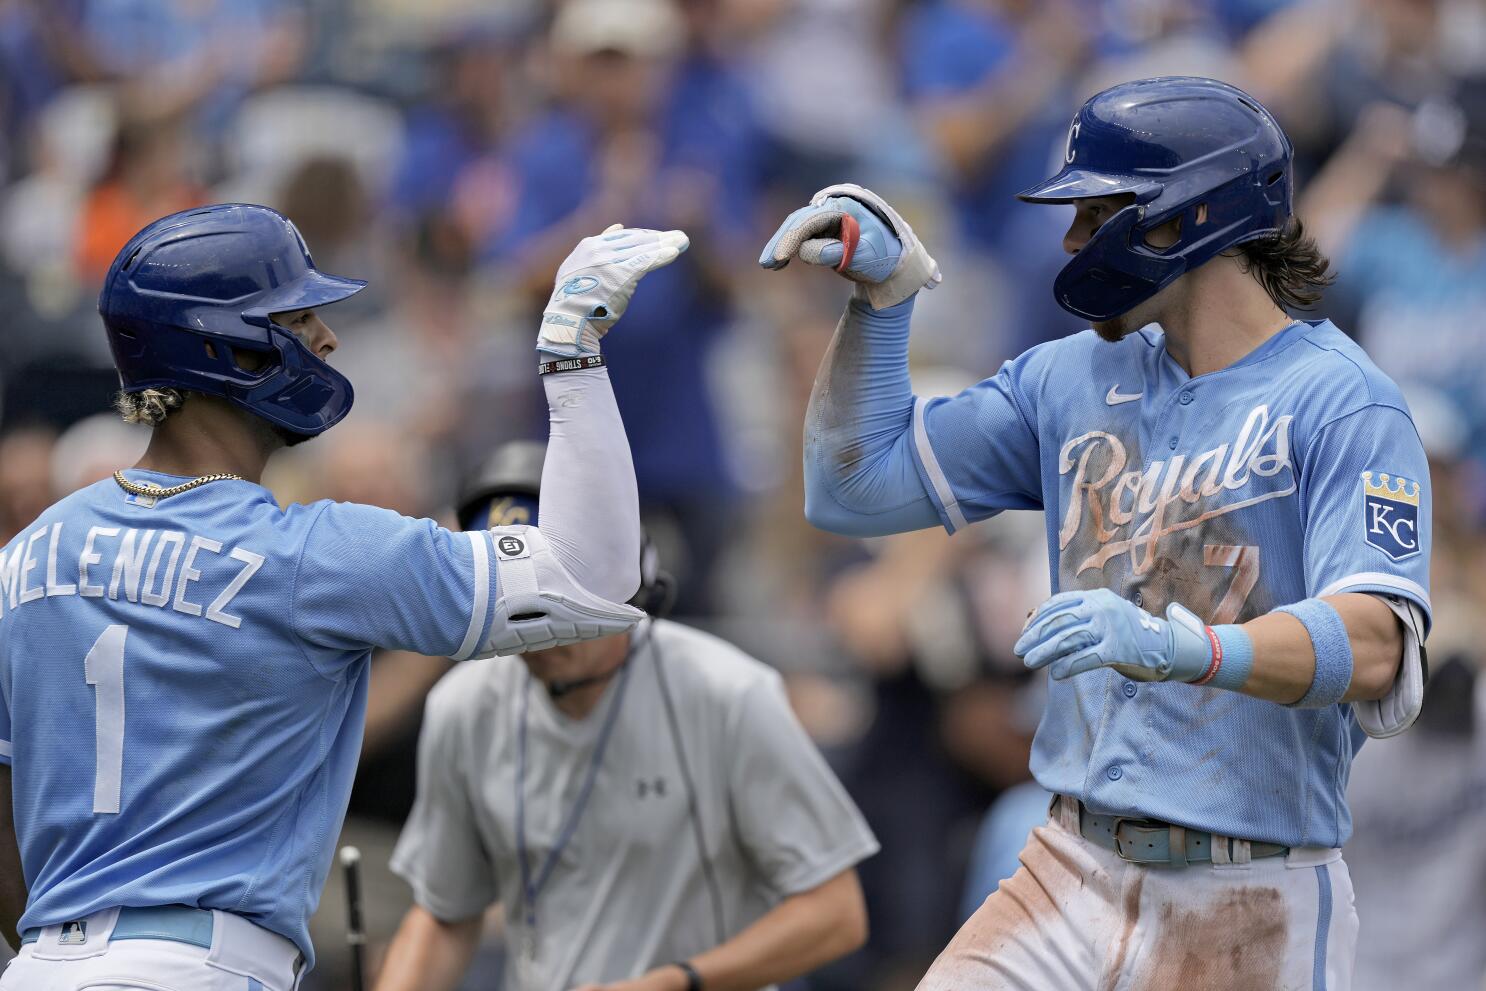 Singer throws 8 innings of 3-hit ball as Royals pound Mets 9-2 to complete  a series sweep - The San Diego Union-Tribune